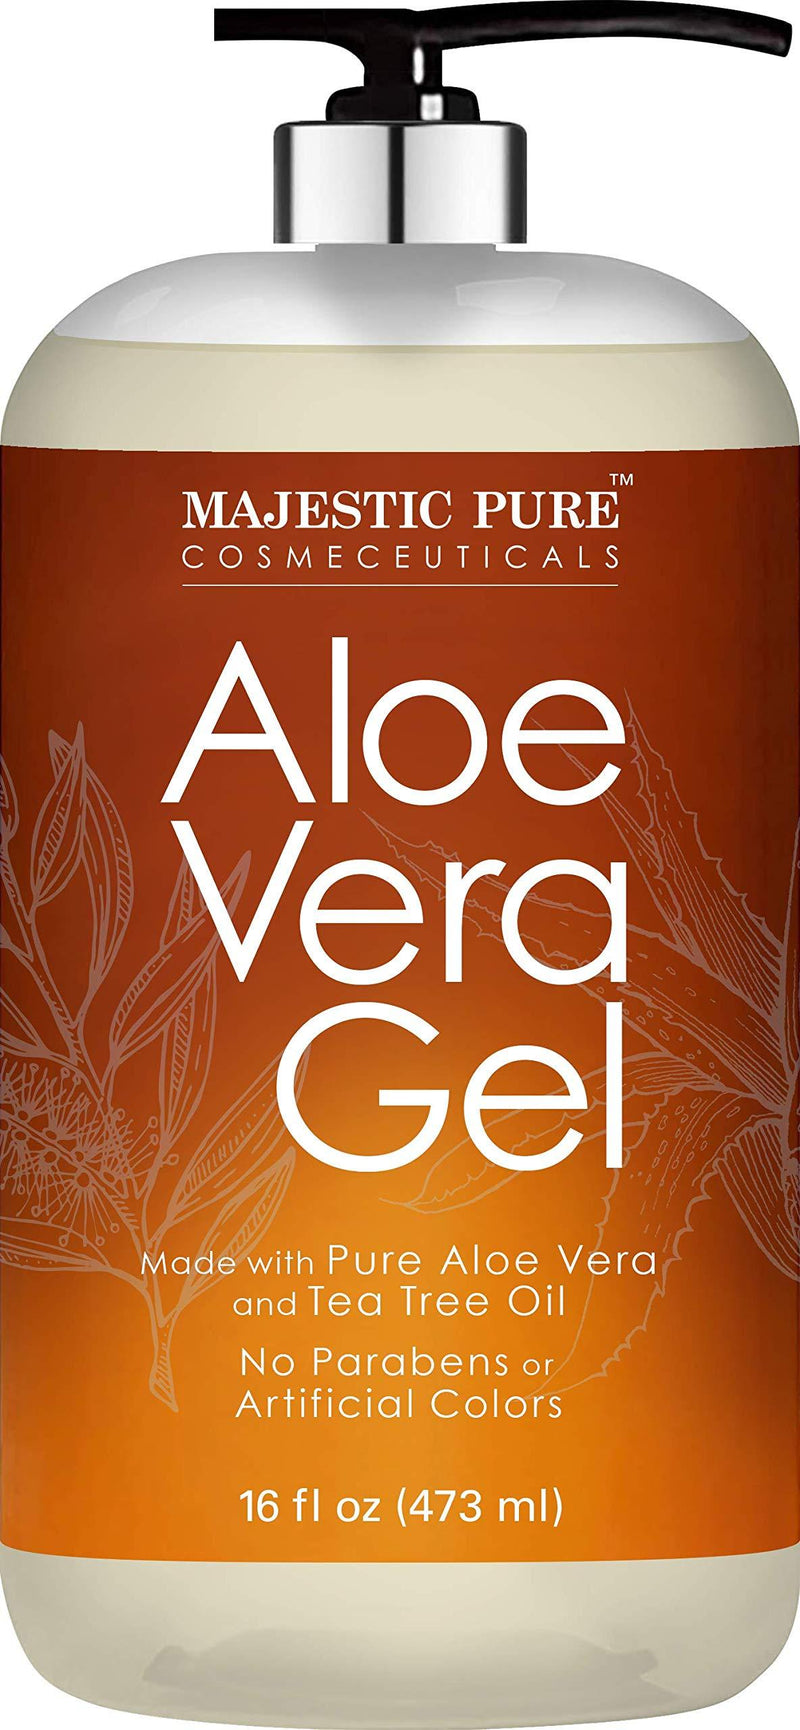 [Australia] - Aloe Vera Gel with Tea Tree Essential Oil by Majestic Pure- Pure Aloe Vera Gel Moisturizes and Nourishes Skin - Soothes Sunburn, Bites, Rashes, Small Cuts & Eczema - (Packaging May Vary) - 16 fl oz 